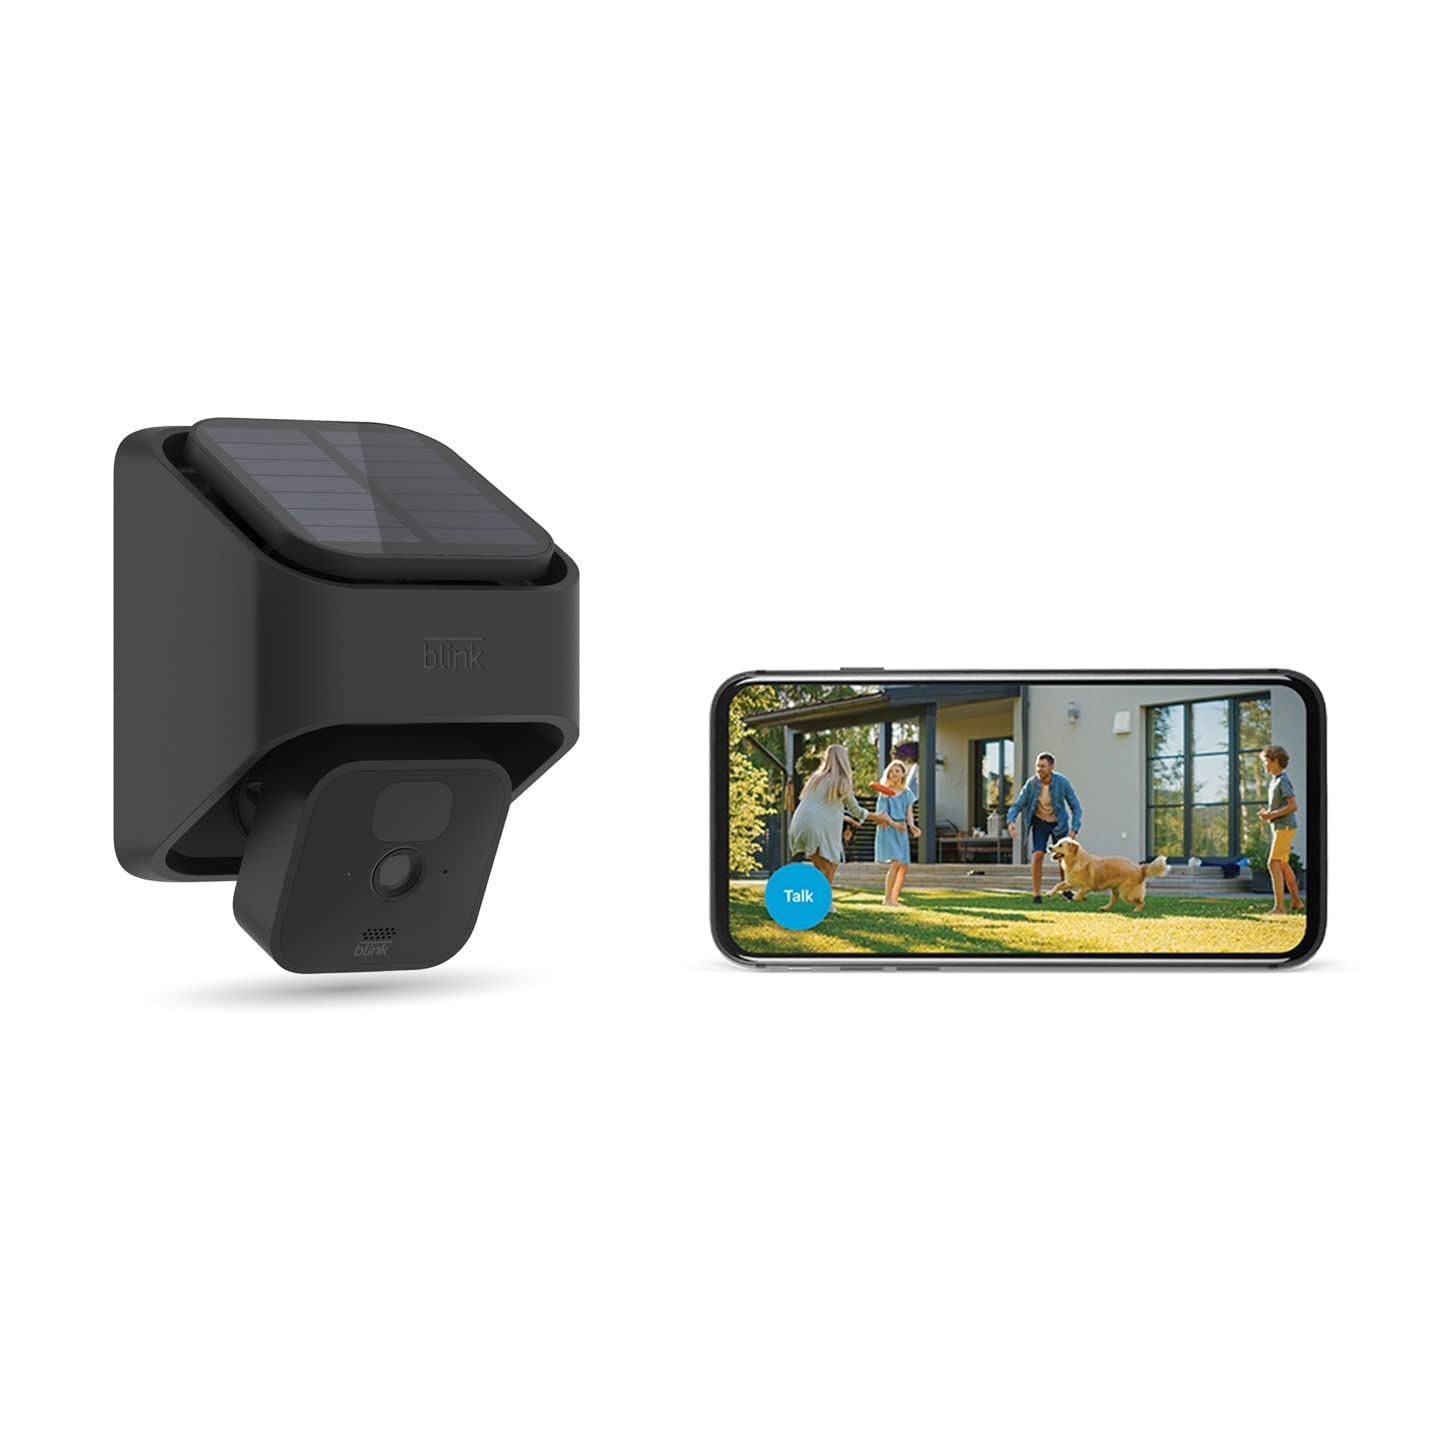 Blink Outdoor (3rd Gen) + Solar Panel Charging Mount – wireless, HD smart security camera, solar-powered, motion detection – 3 camera system